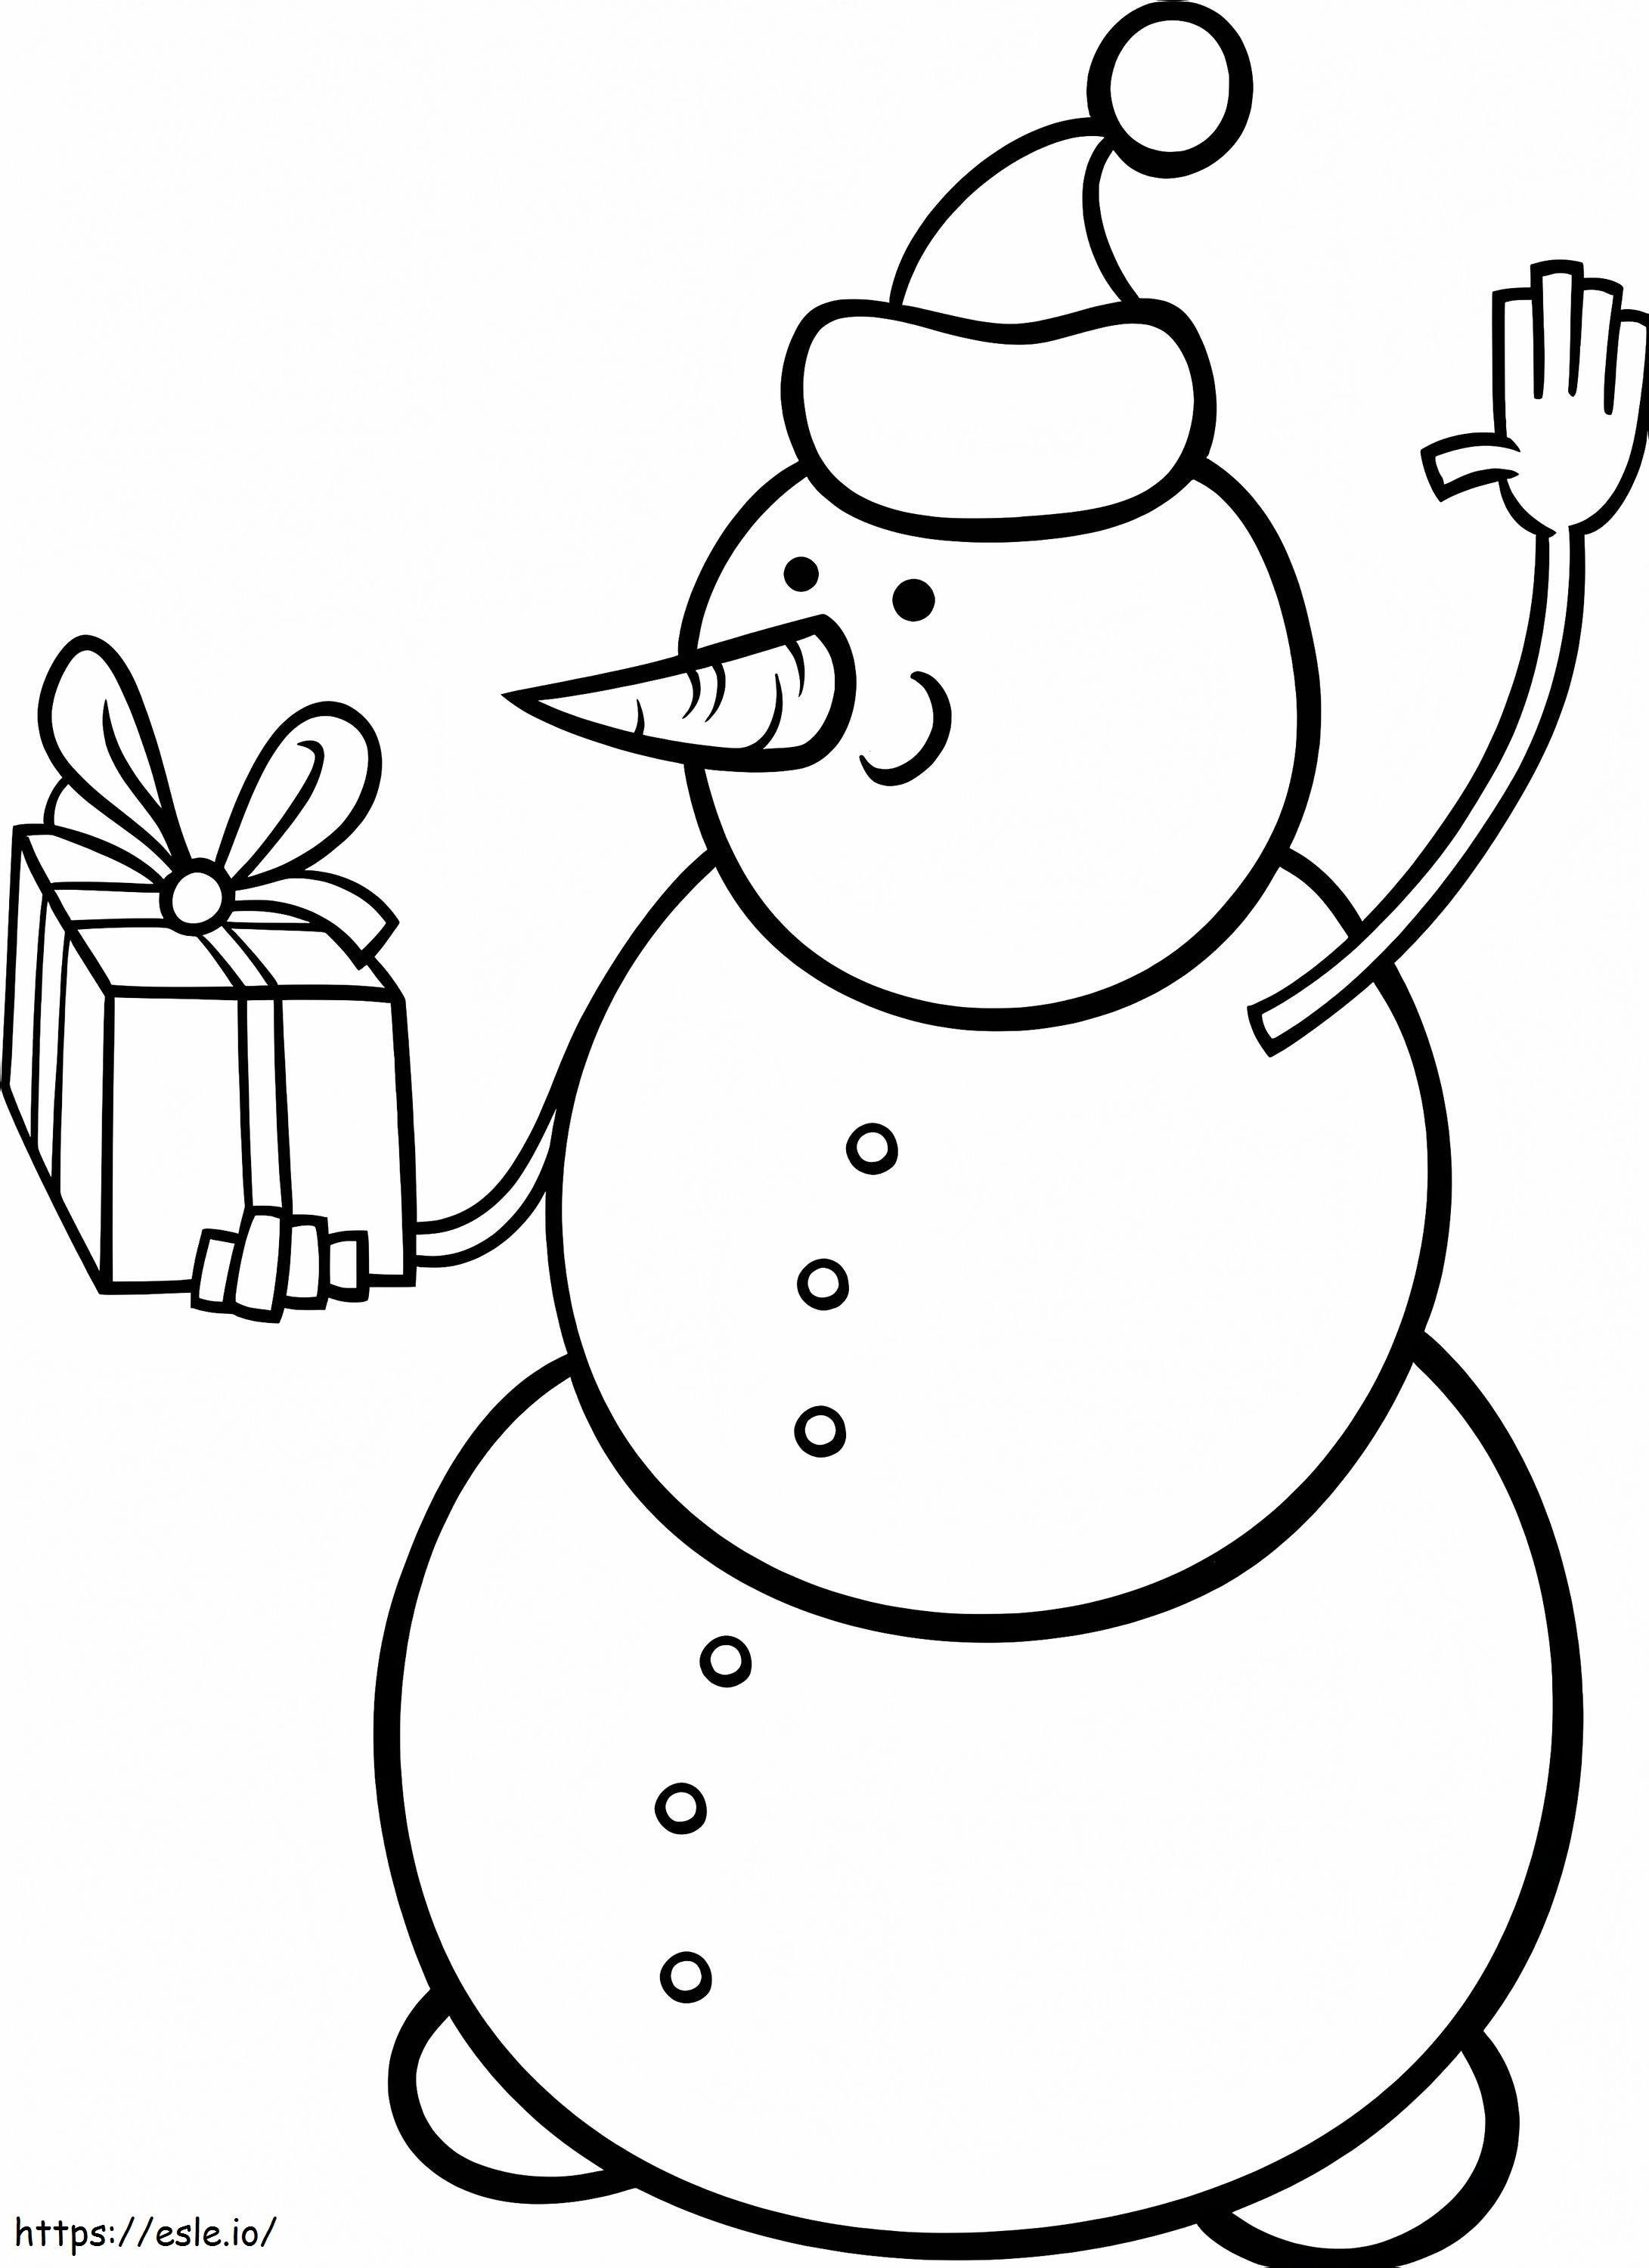 Snowman With Gift Box coloring page